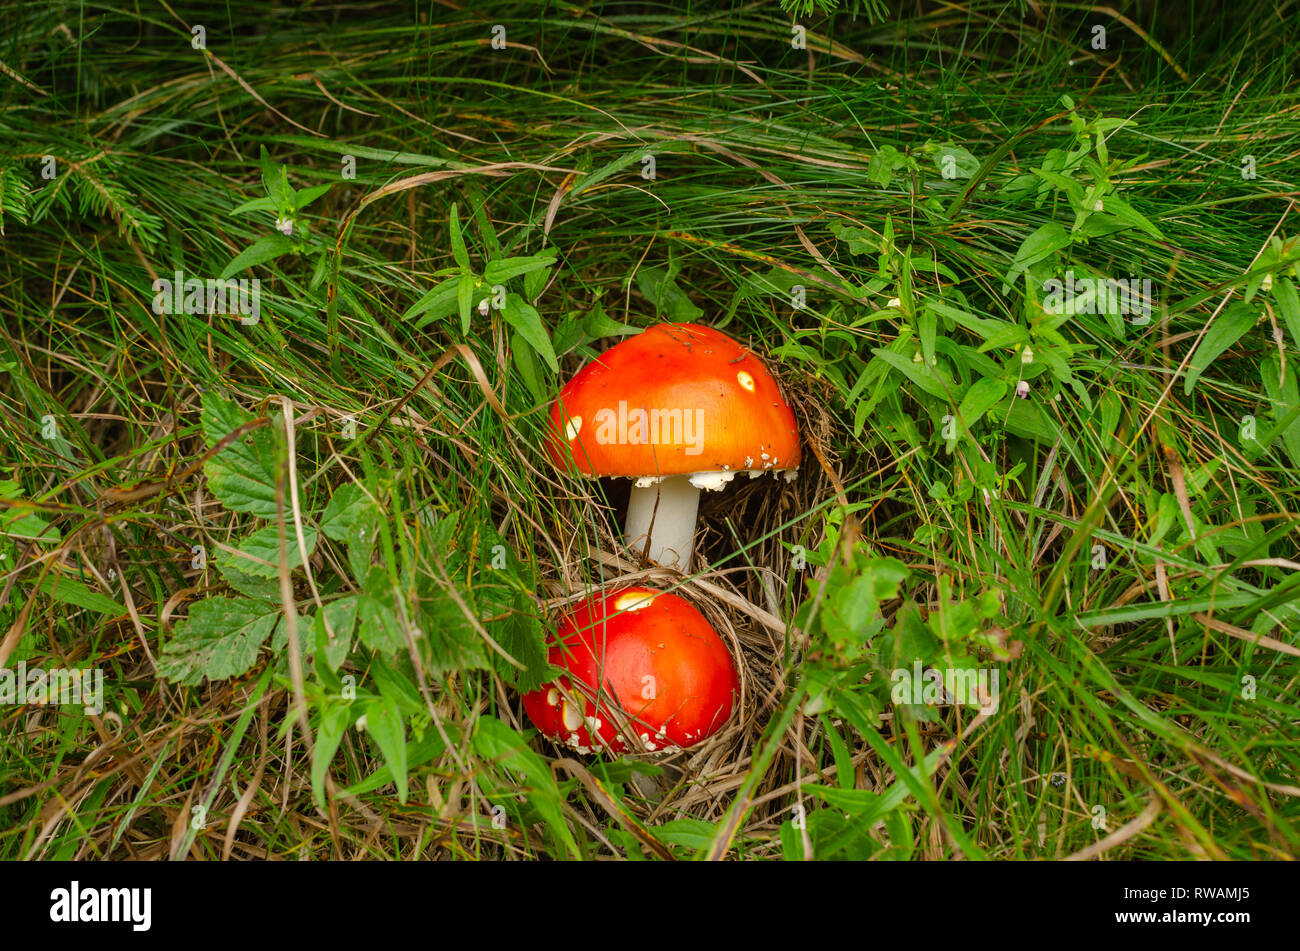 Two red mushrooms hidden in green grass Stock Photo